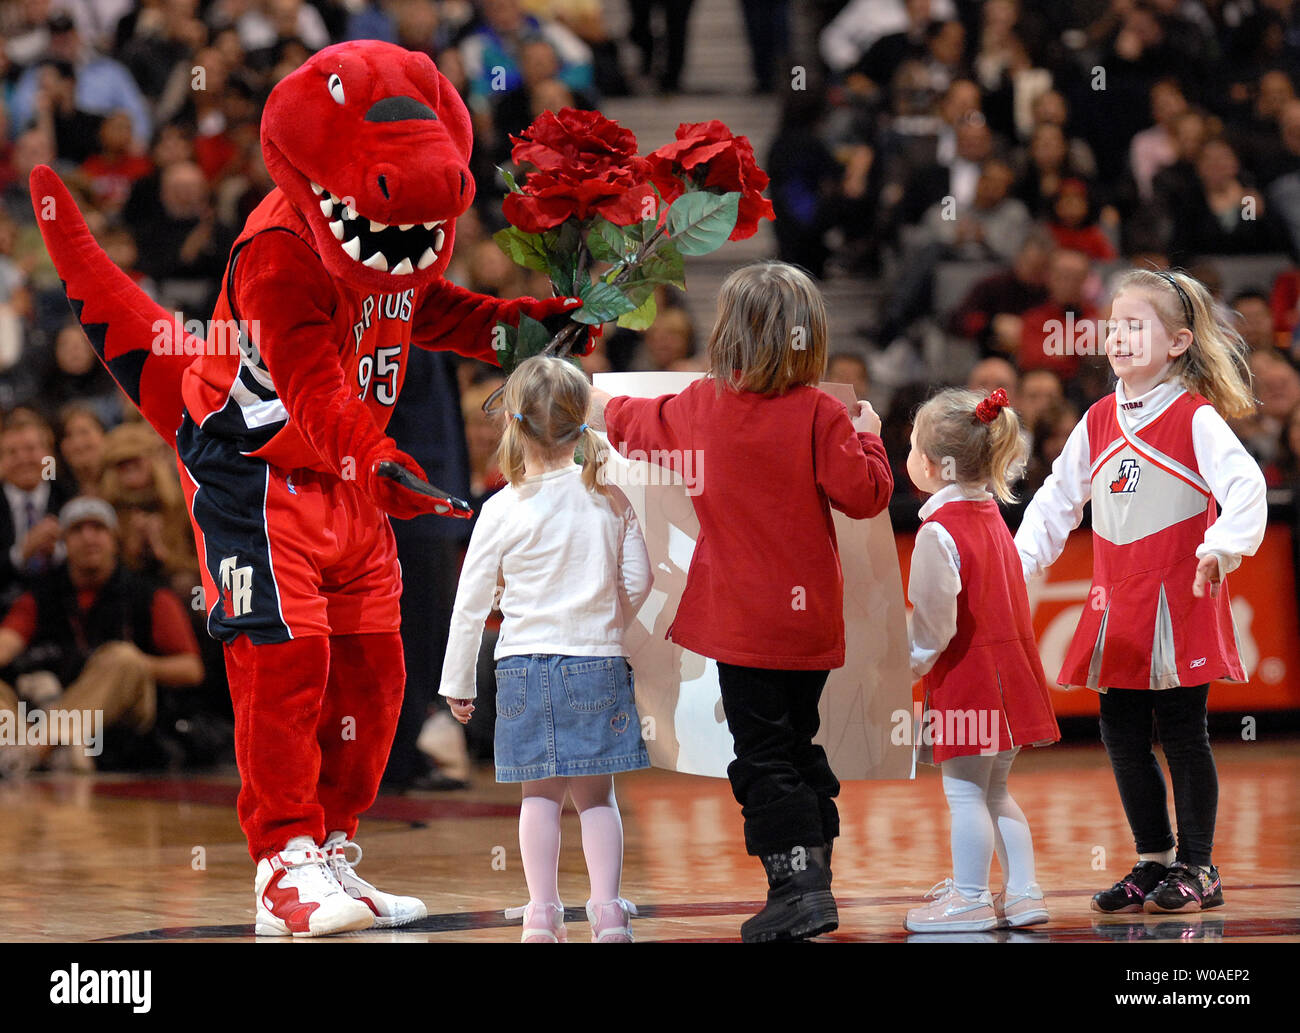 The Raptor, mascot of the Toronto Raptors, receives flowers from young fans during the Valentine's Day game against the New Jersey Nets at the Air Canada Center in Toronto, Canada on February 14, 2007. The Raptors defeated the Nets 120-109. (UPI Photo/Christine Chew) Stock Photo